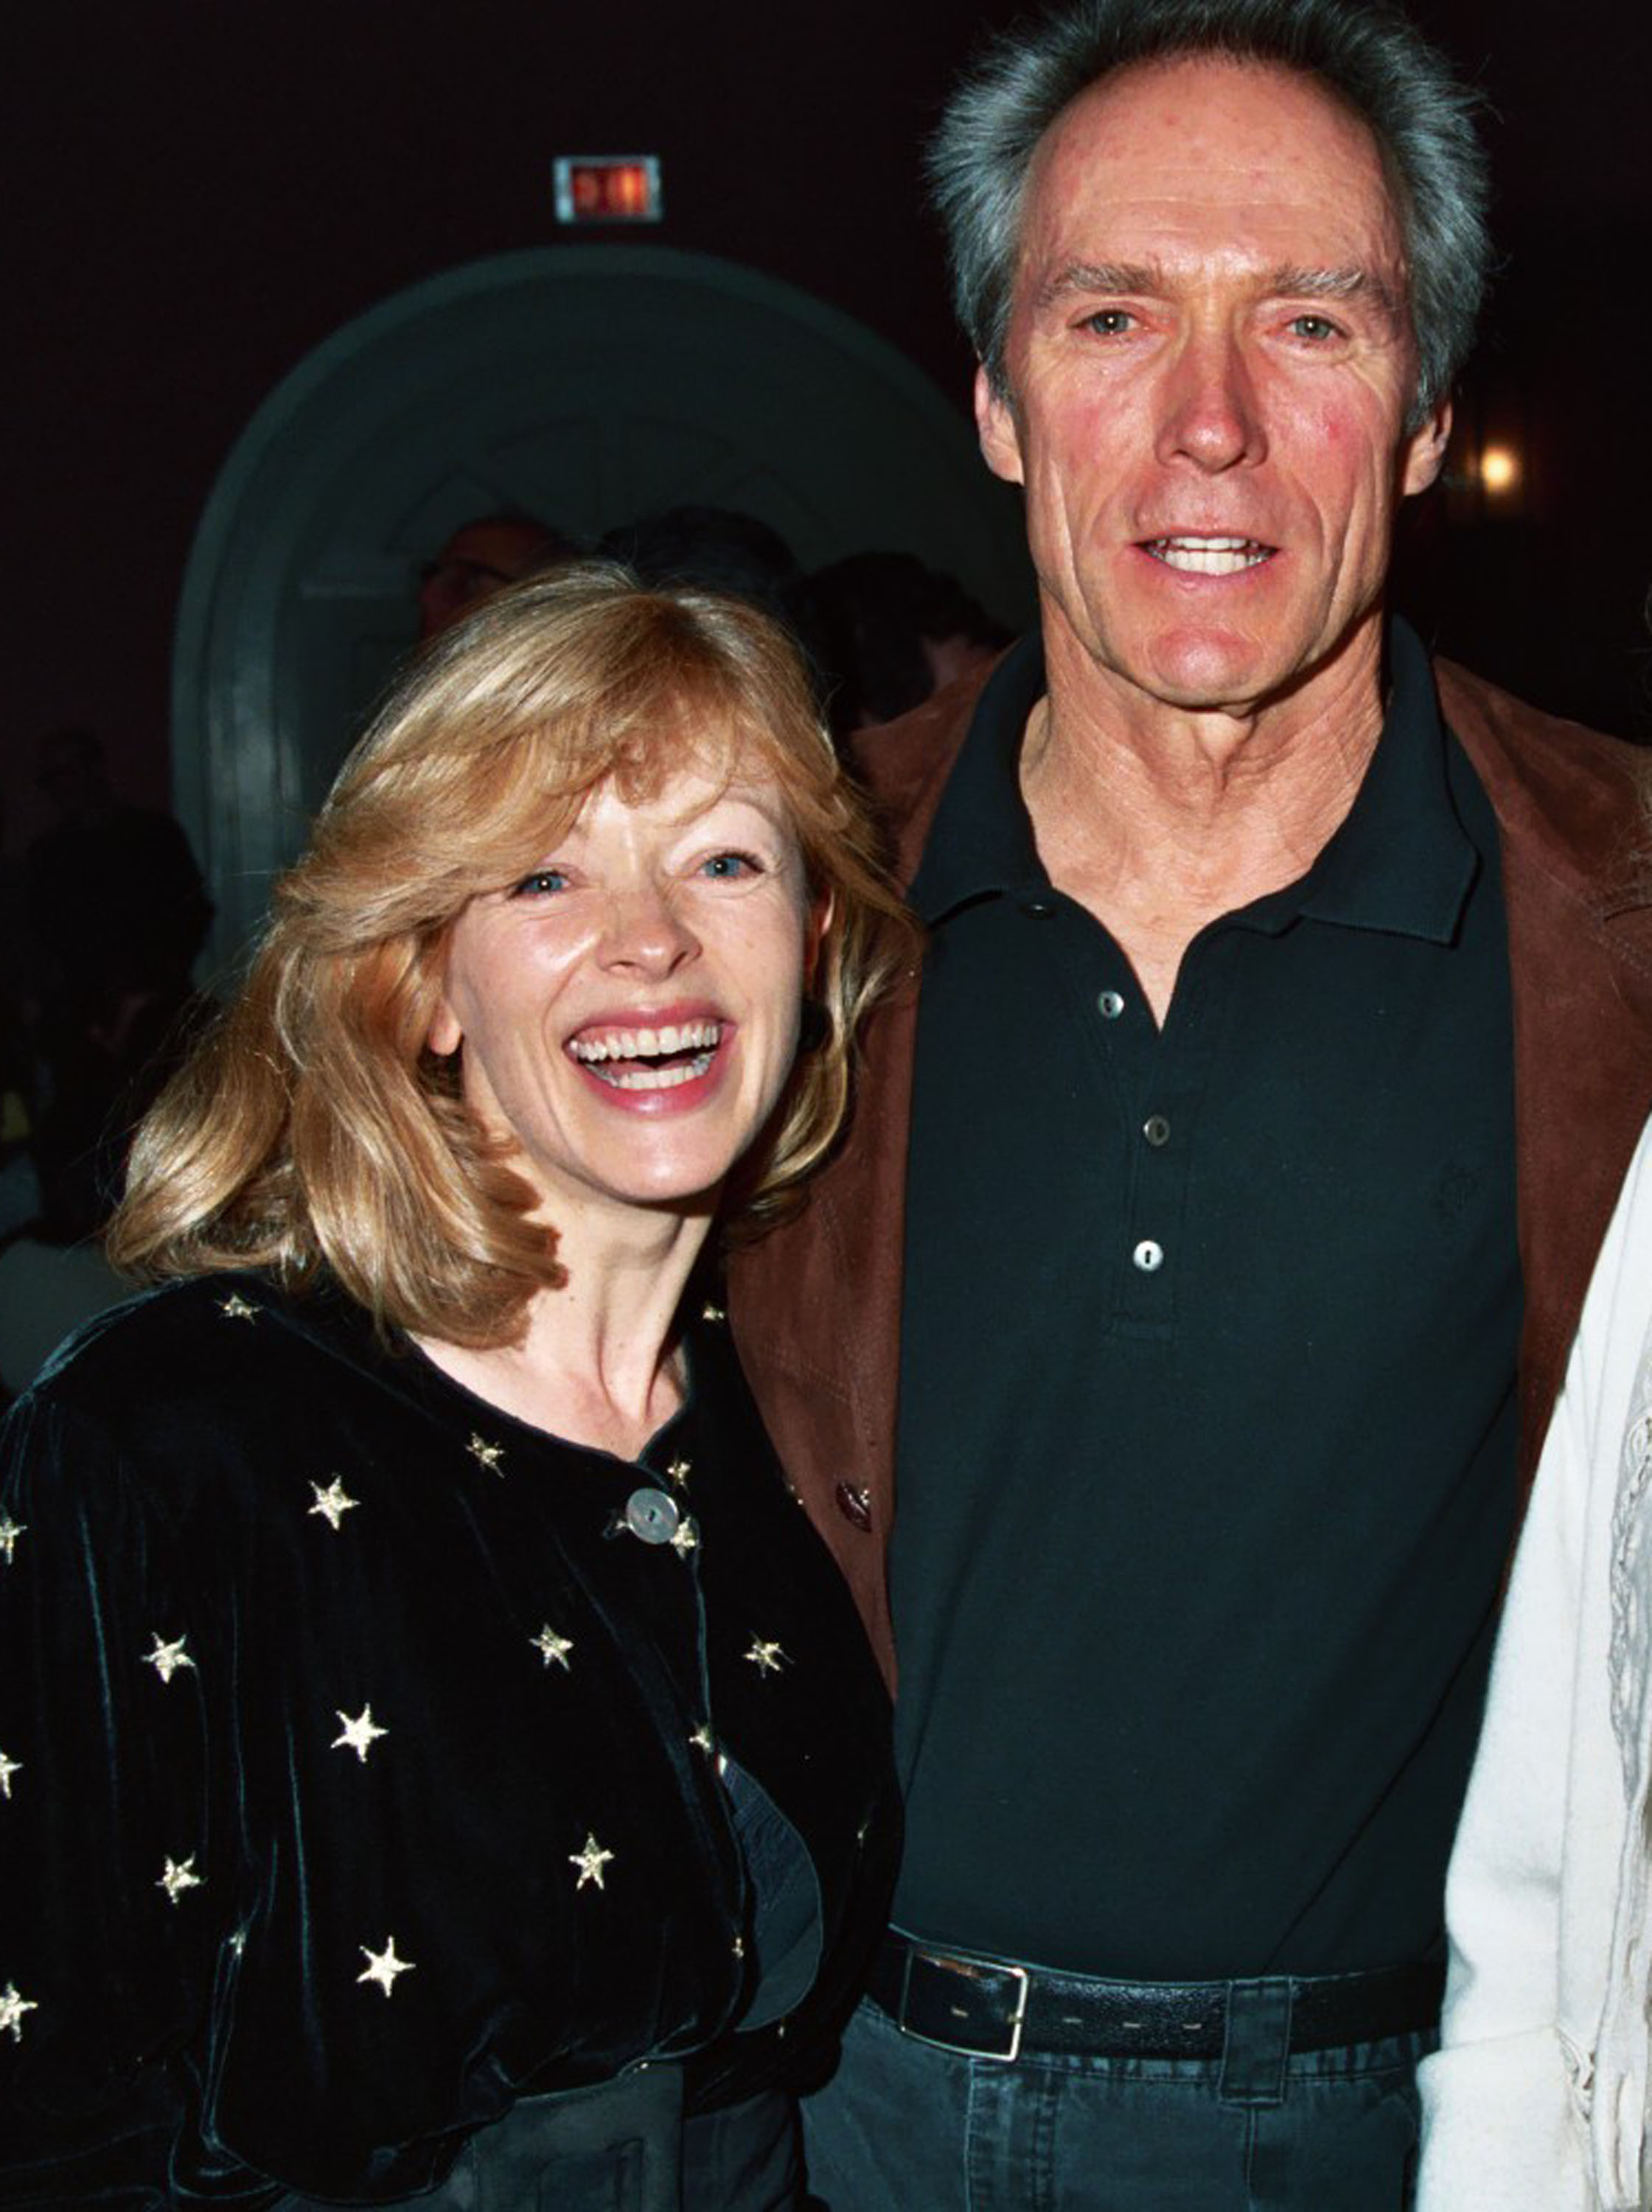 Clint Eastwood and Frances Fisher at the 50 Ft. Woman Premiere in October 2007 | Source: Getty Images